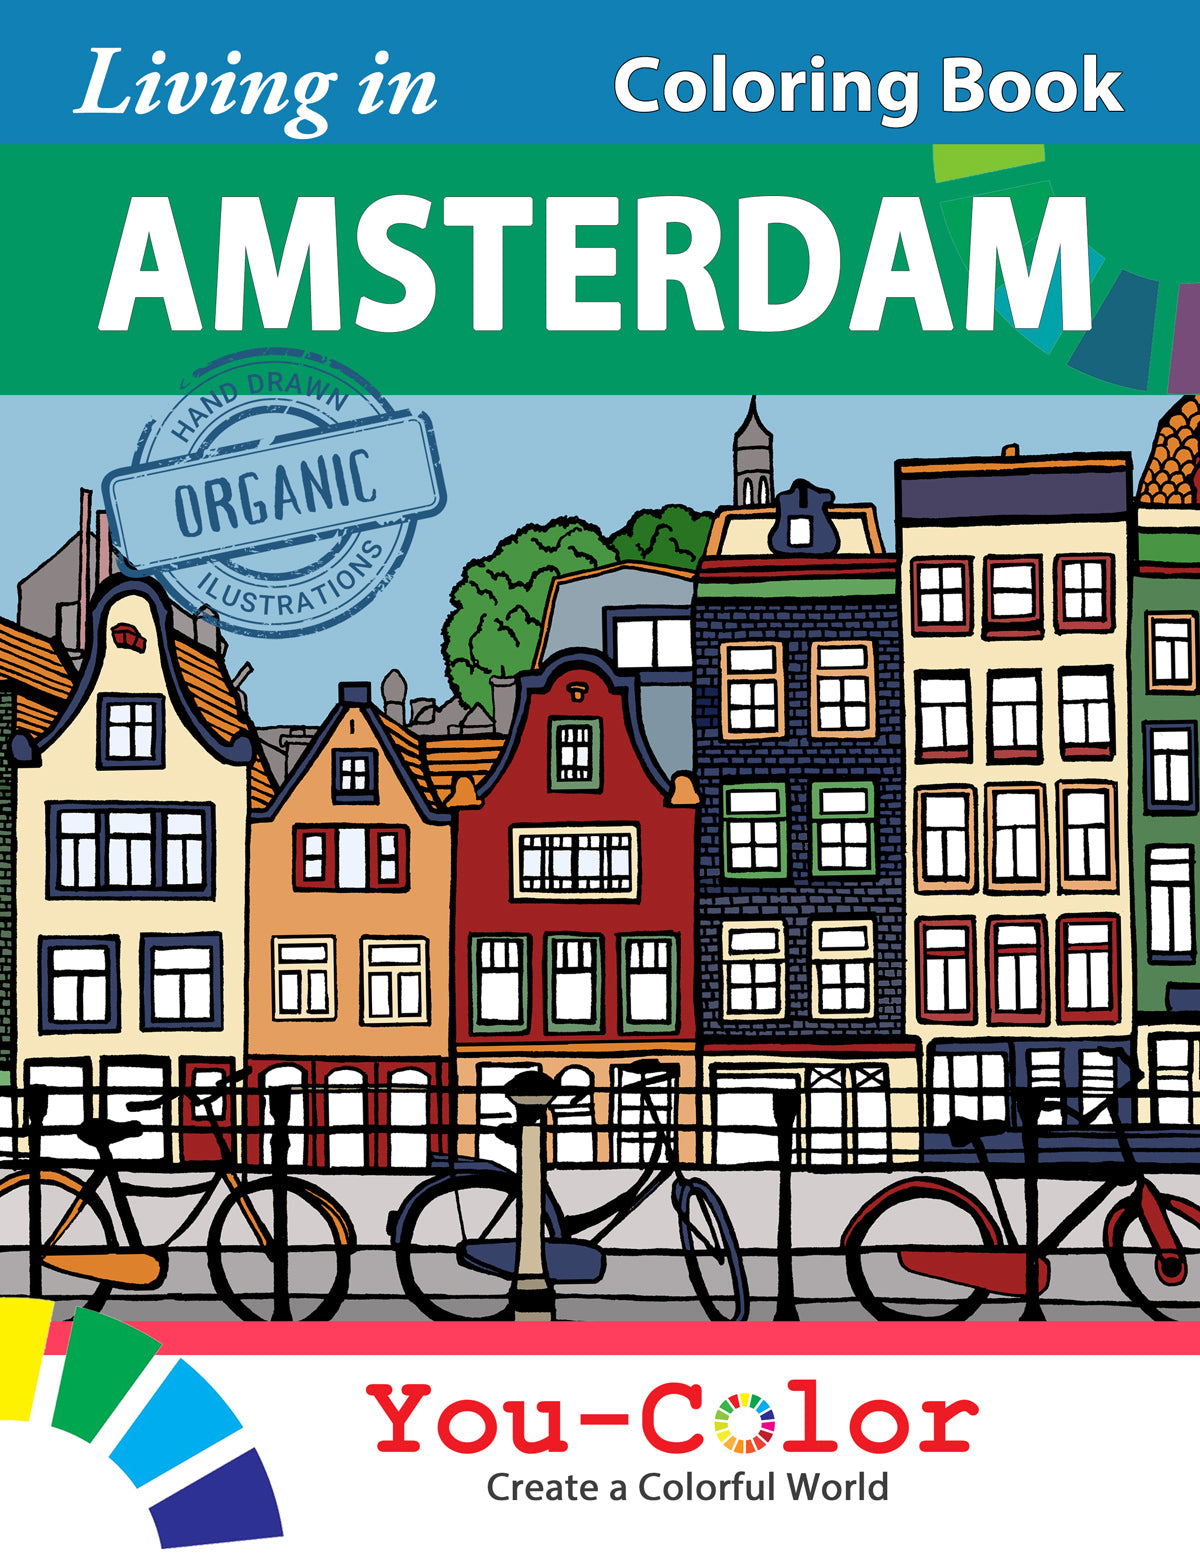 RETAIL Living in Amsterdam Coloring Book **** ORDER MIN 20 FOR 40% DISCOUNT AT CHECKOUT **** INCLUDES FREE SHIPPING - You-Color